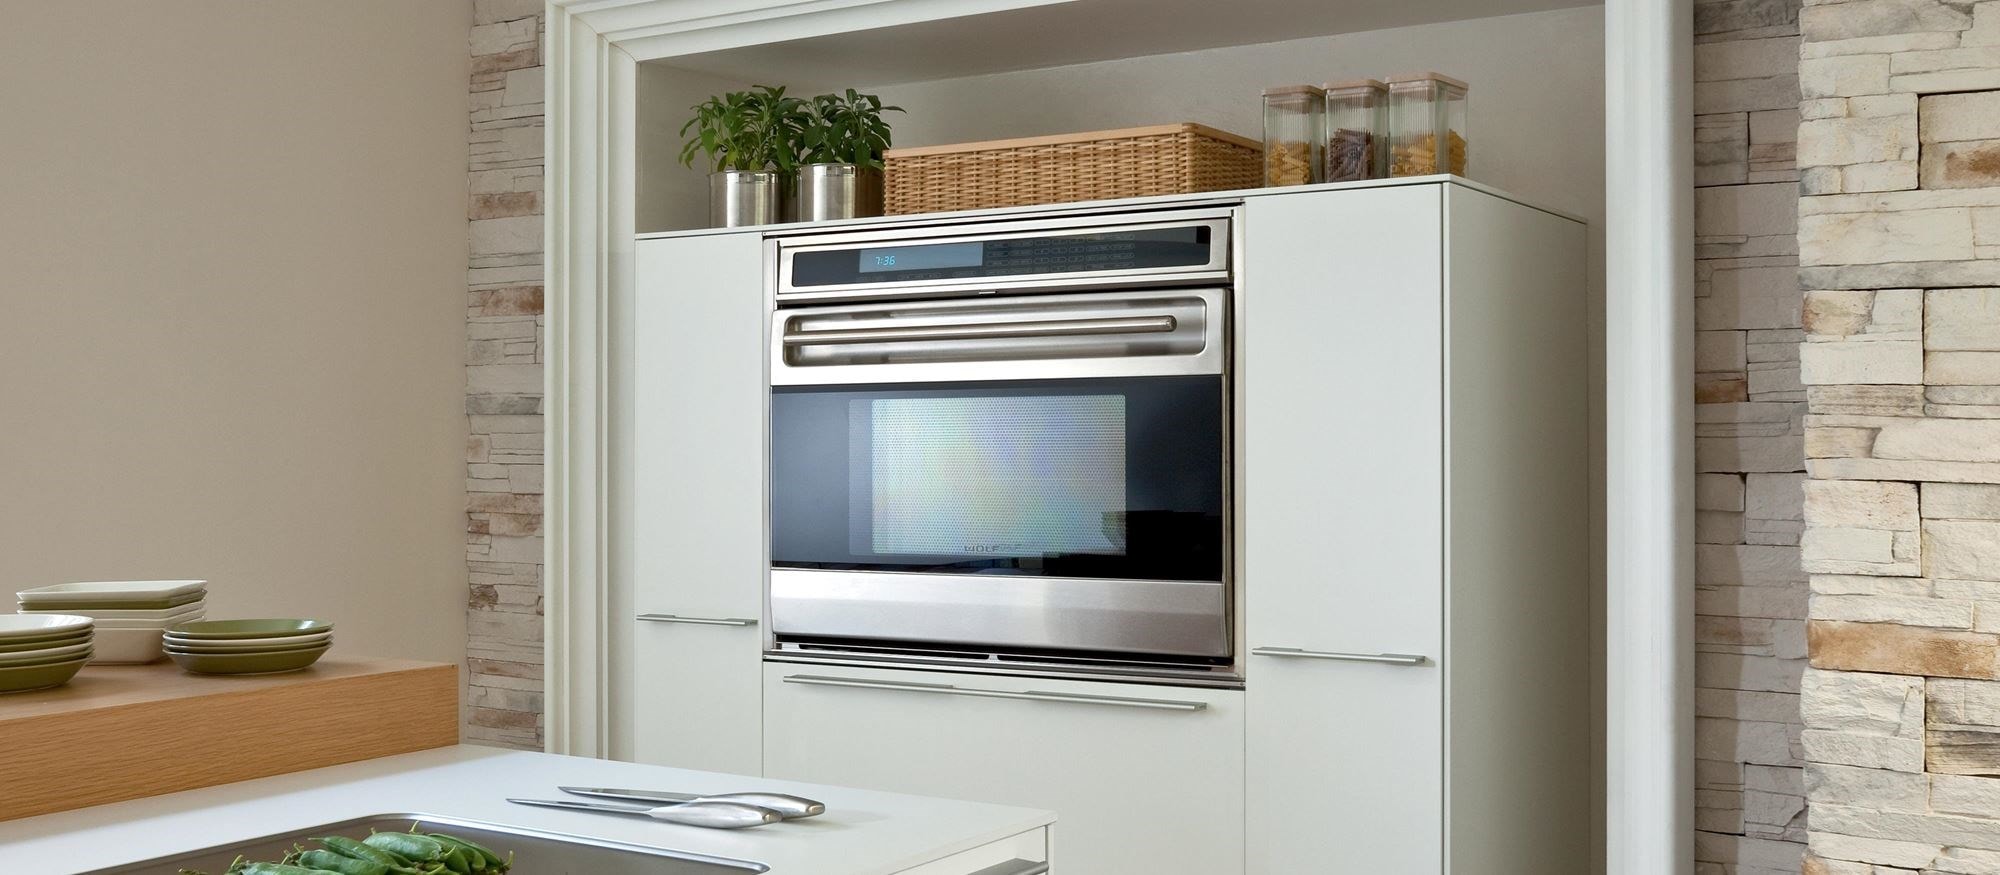 https://www.subzero-wolf.com/products/wolf/ovens/l-series/so36/-/media/images/united-states/widen/product-heroes/so36u_s_vignette.jpg?h=875&width=2000&udi=1&cropregion=430,545,4430,2295